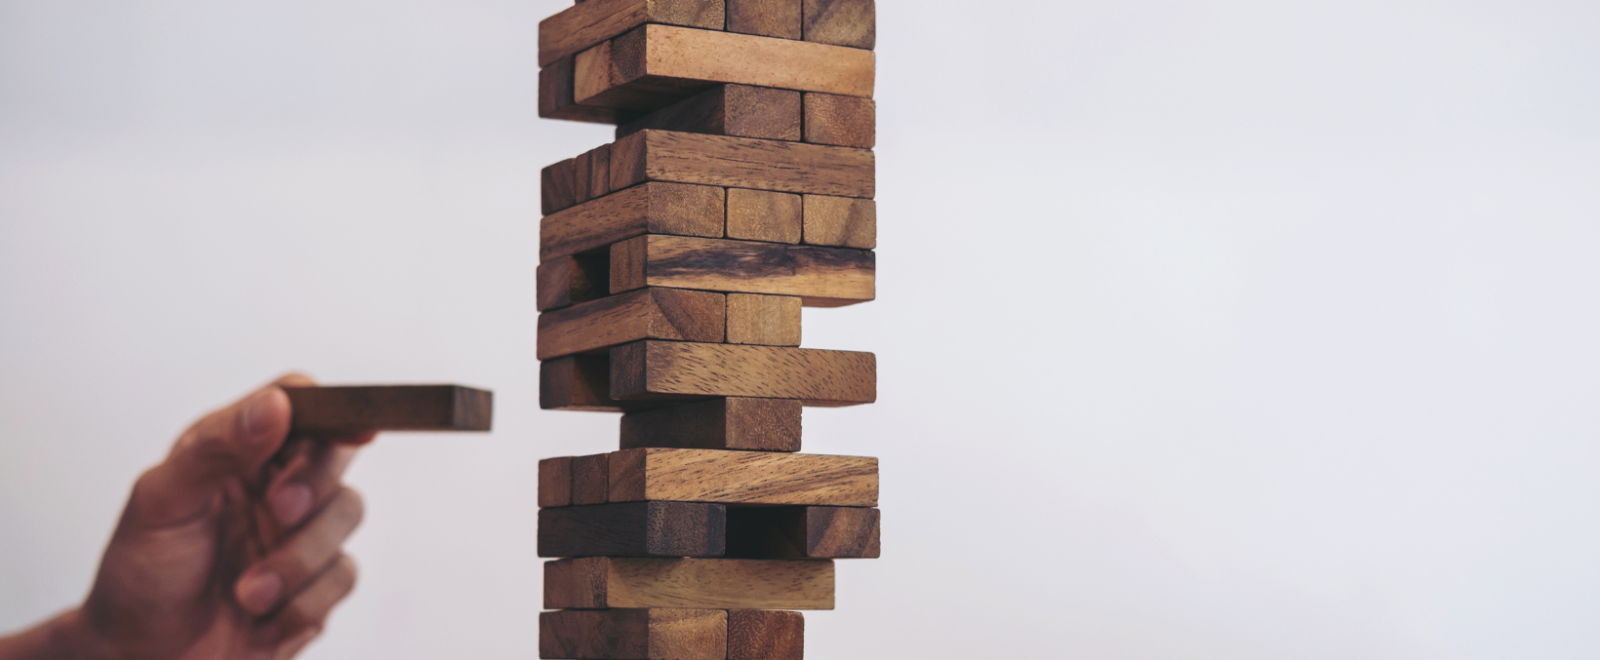 A tower of wooden blocks.